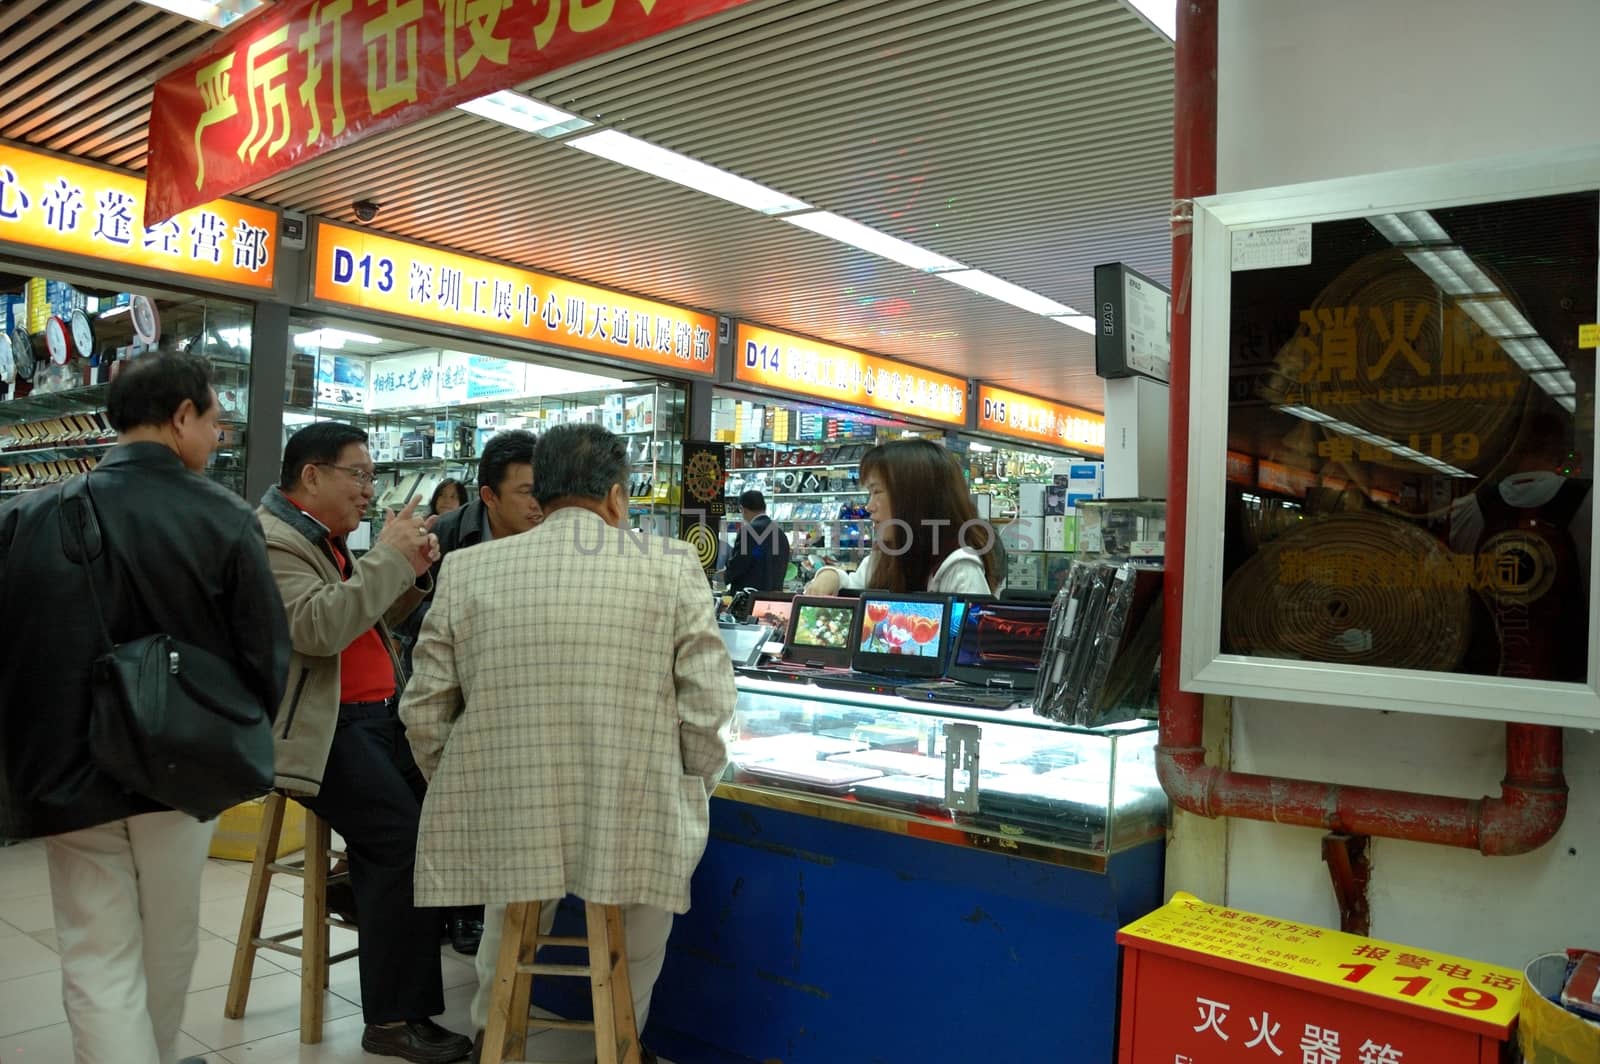 SHENZHEN, CHINA - MARCH 10, 2011: Unidentified salesman and customers inside electronic market on 10th March in Shenzhen, China. 